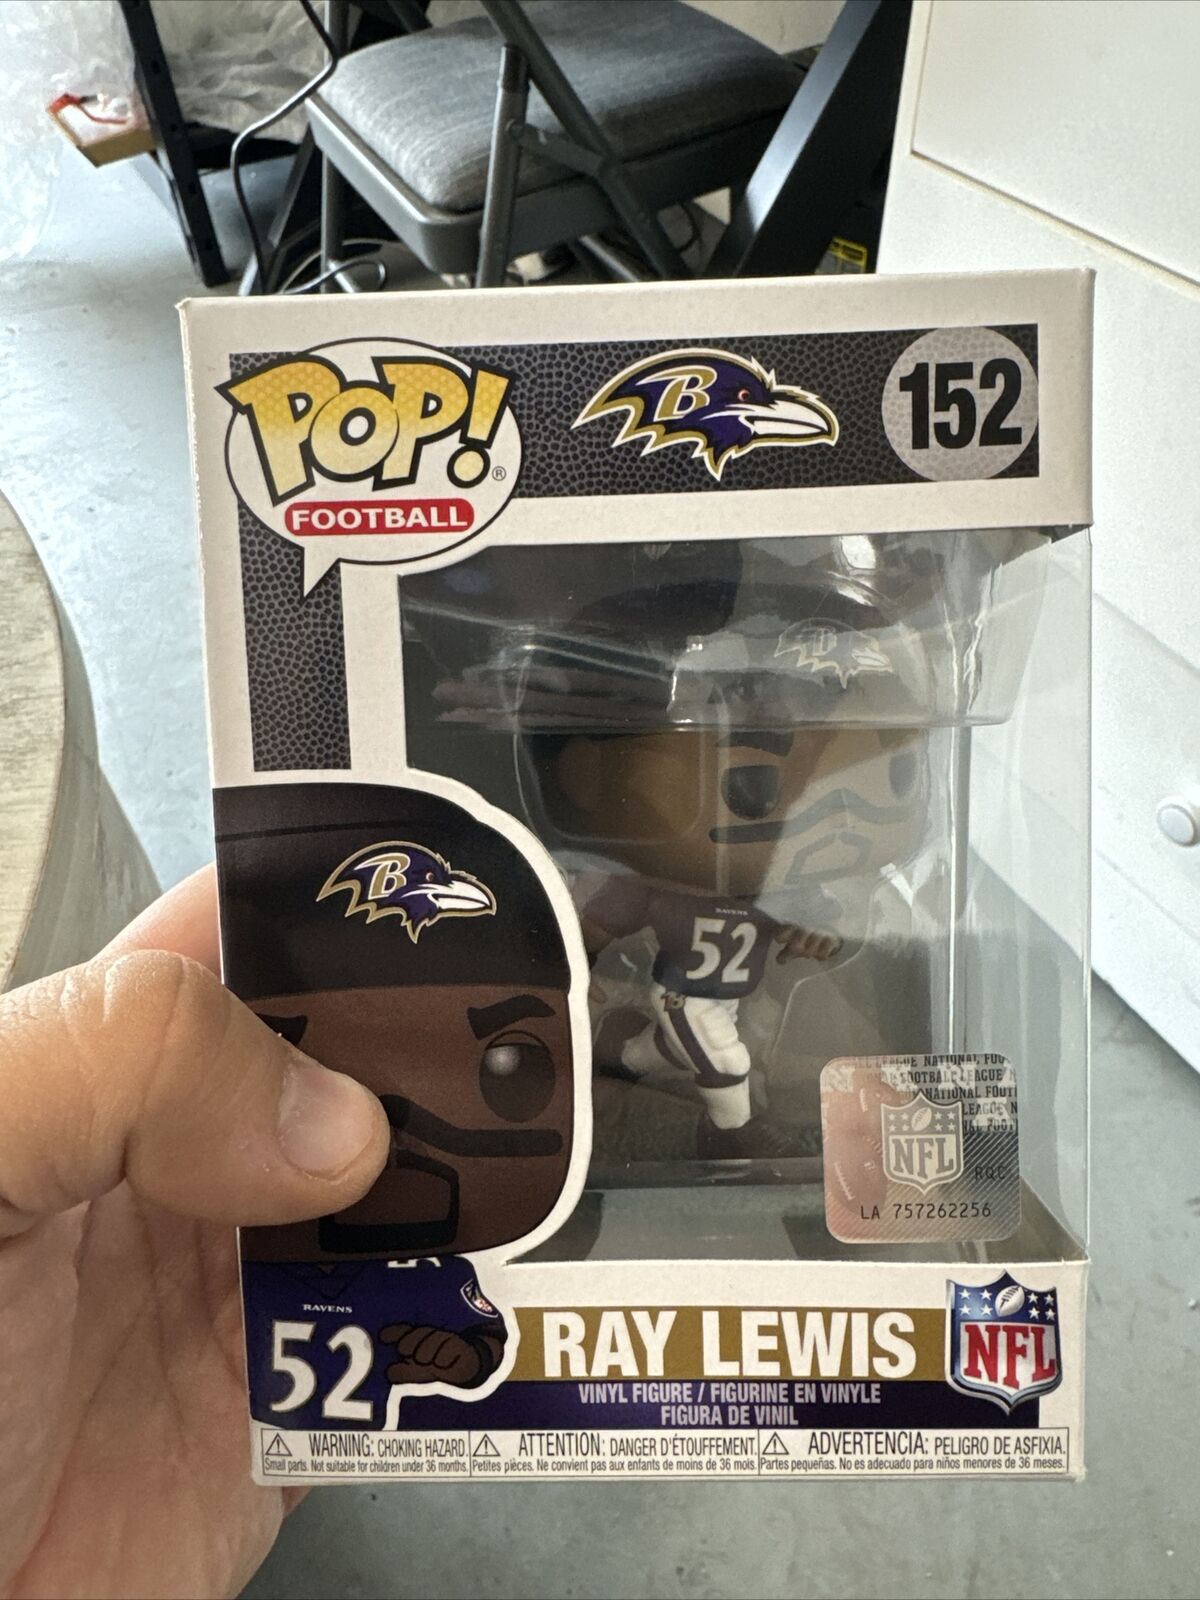 Funko Pop Vinyl: Ray Lewis #152 New But Box Ripped